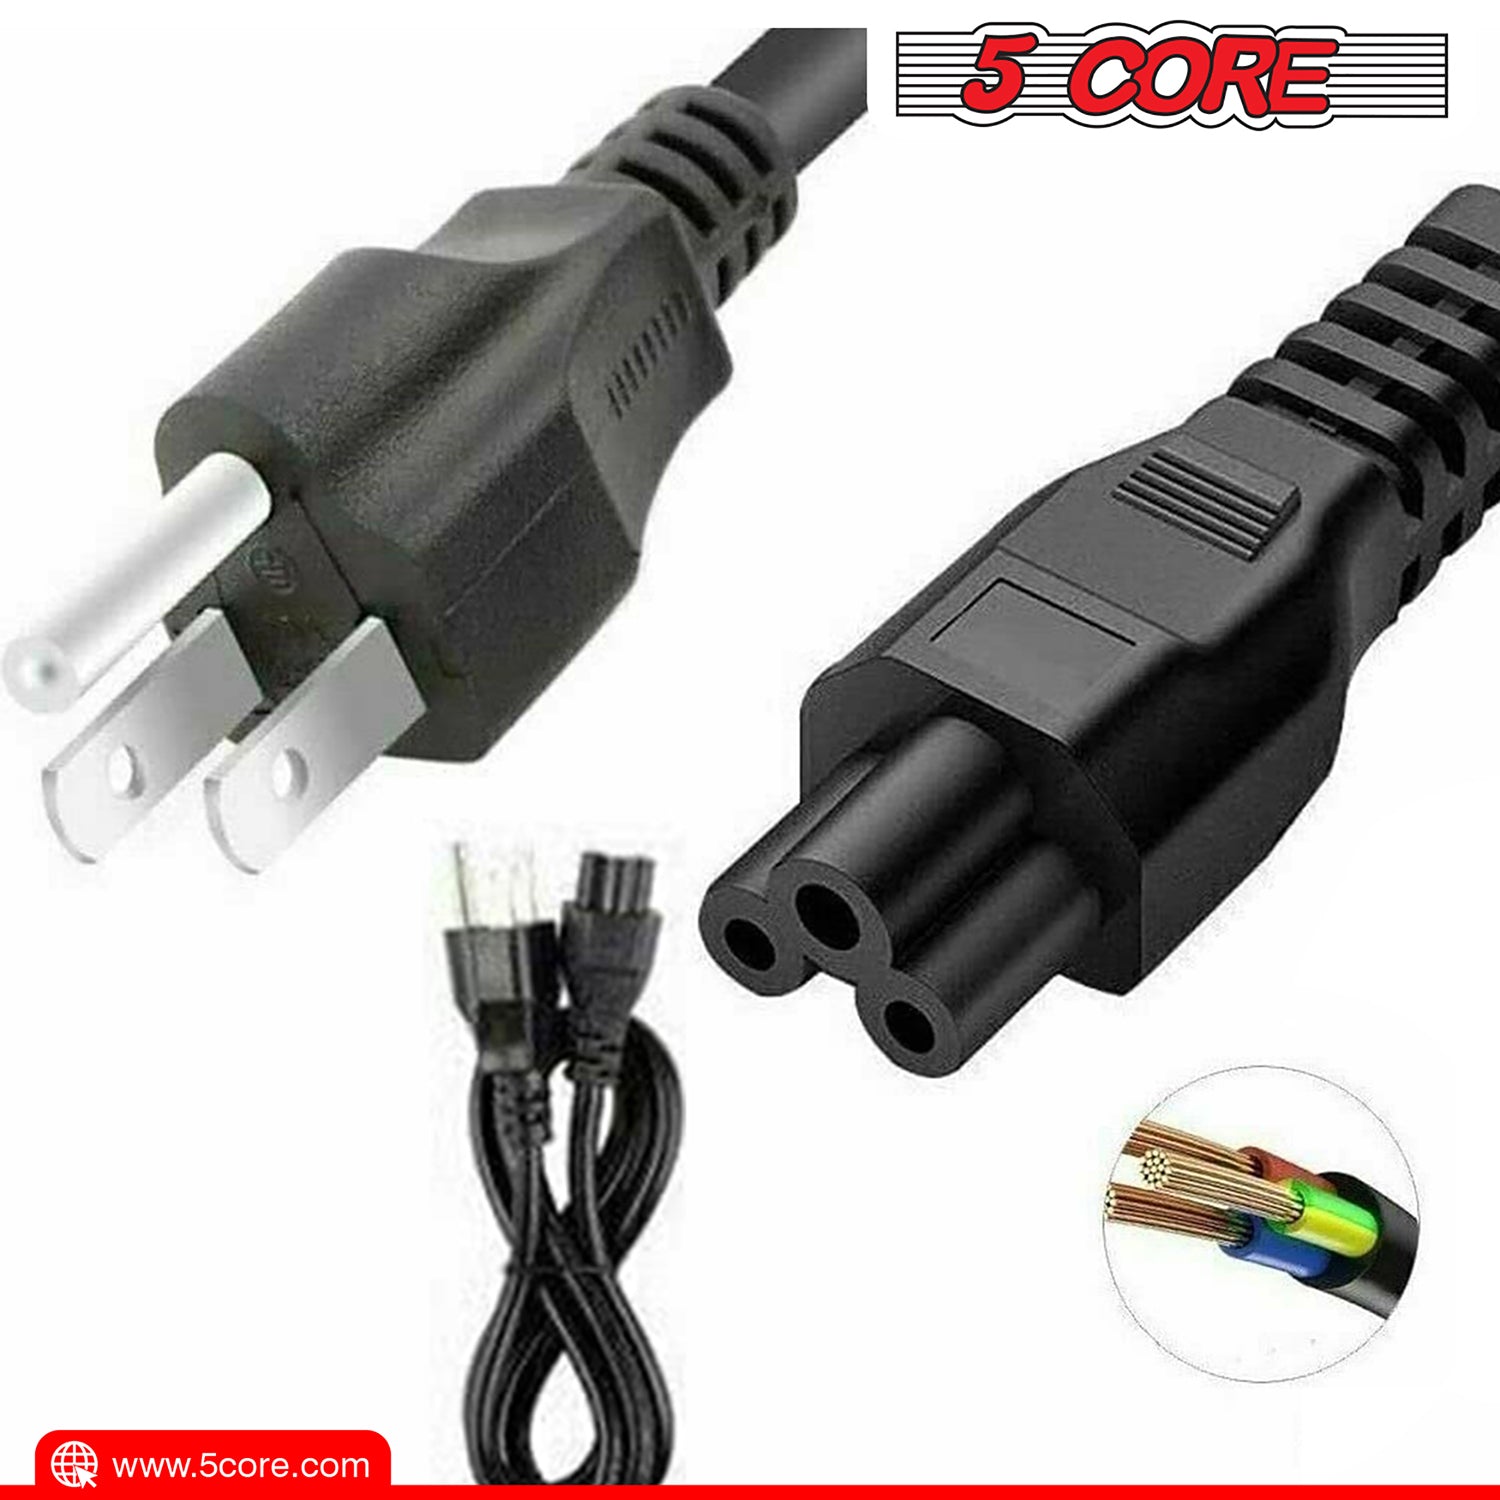 5Core AC Power Cord 10Ft 3 Prong Extension Adapter 16AWG 125V 13A US Polarized Male- Female 1/2/5 Pc